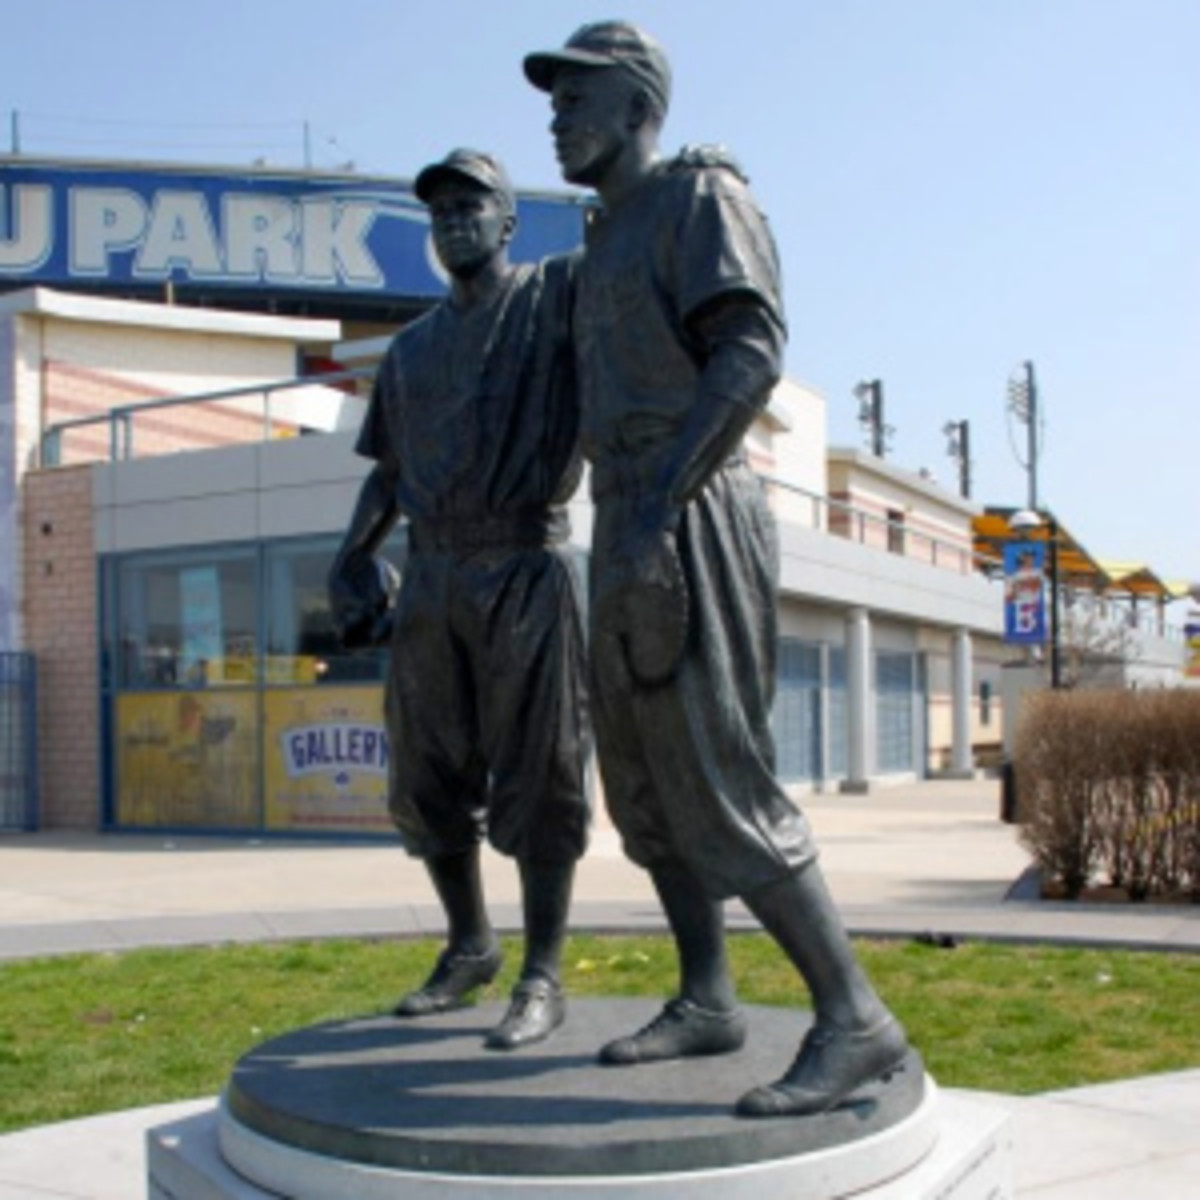 The Jackie Robinson statue in Coney Island was defaced with racial slurs and swastikas on Wednesday morning. (Associated Press)